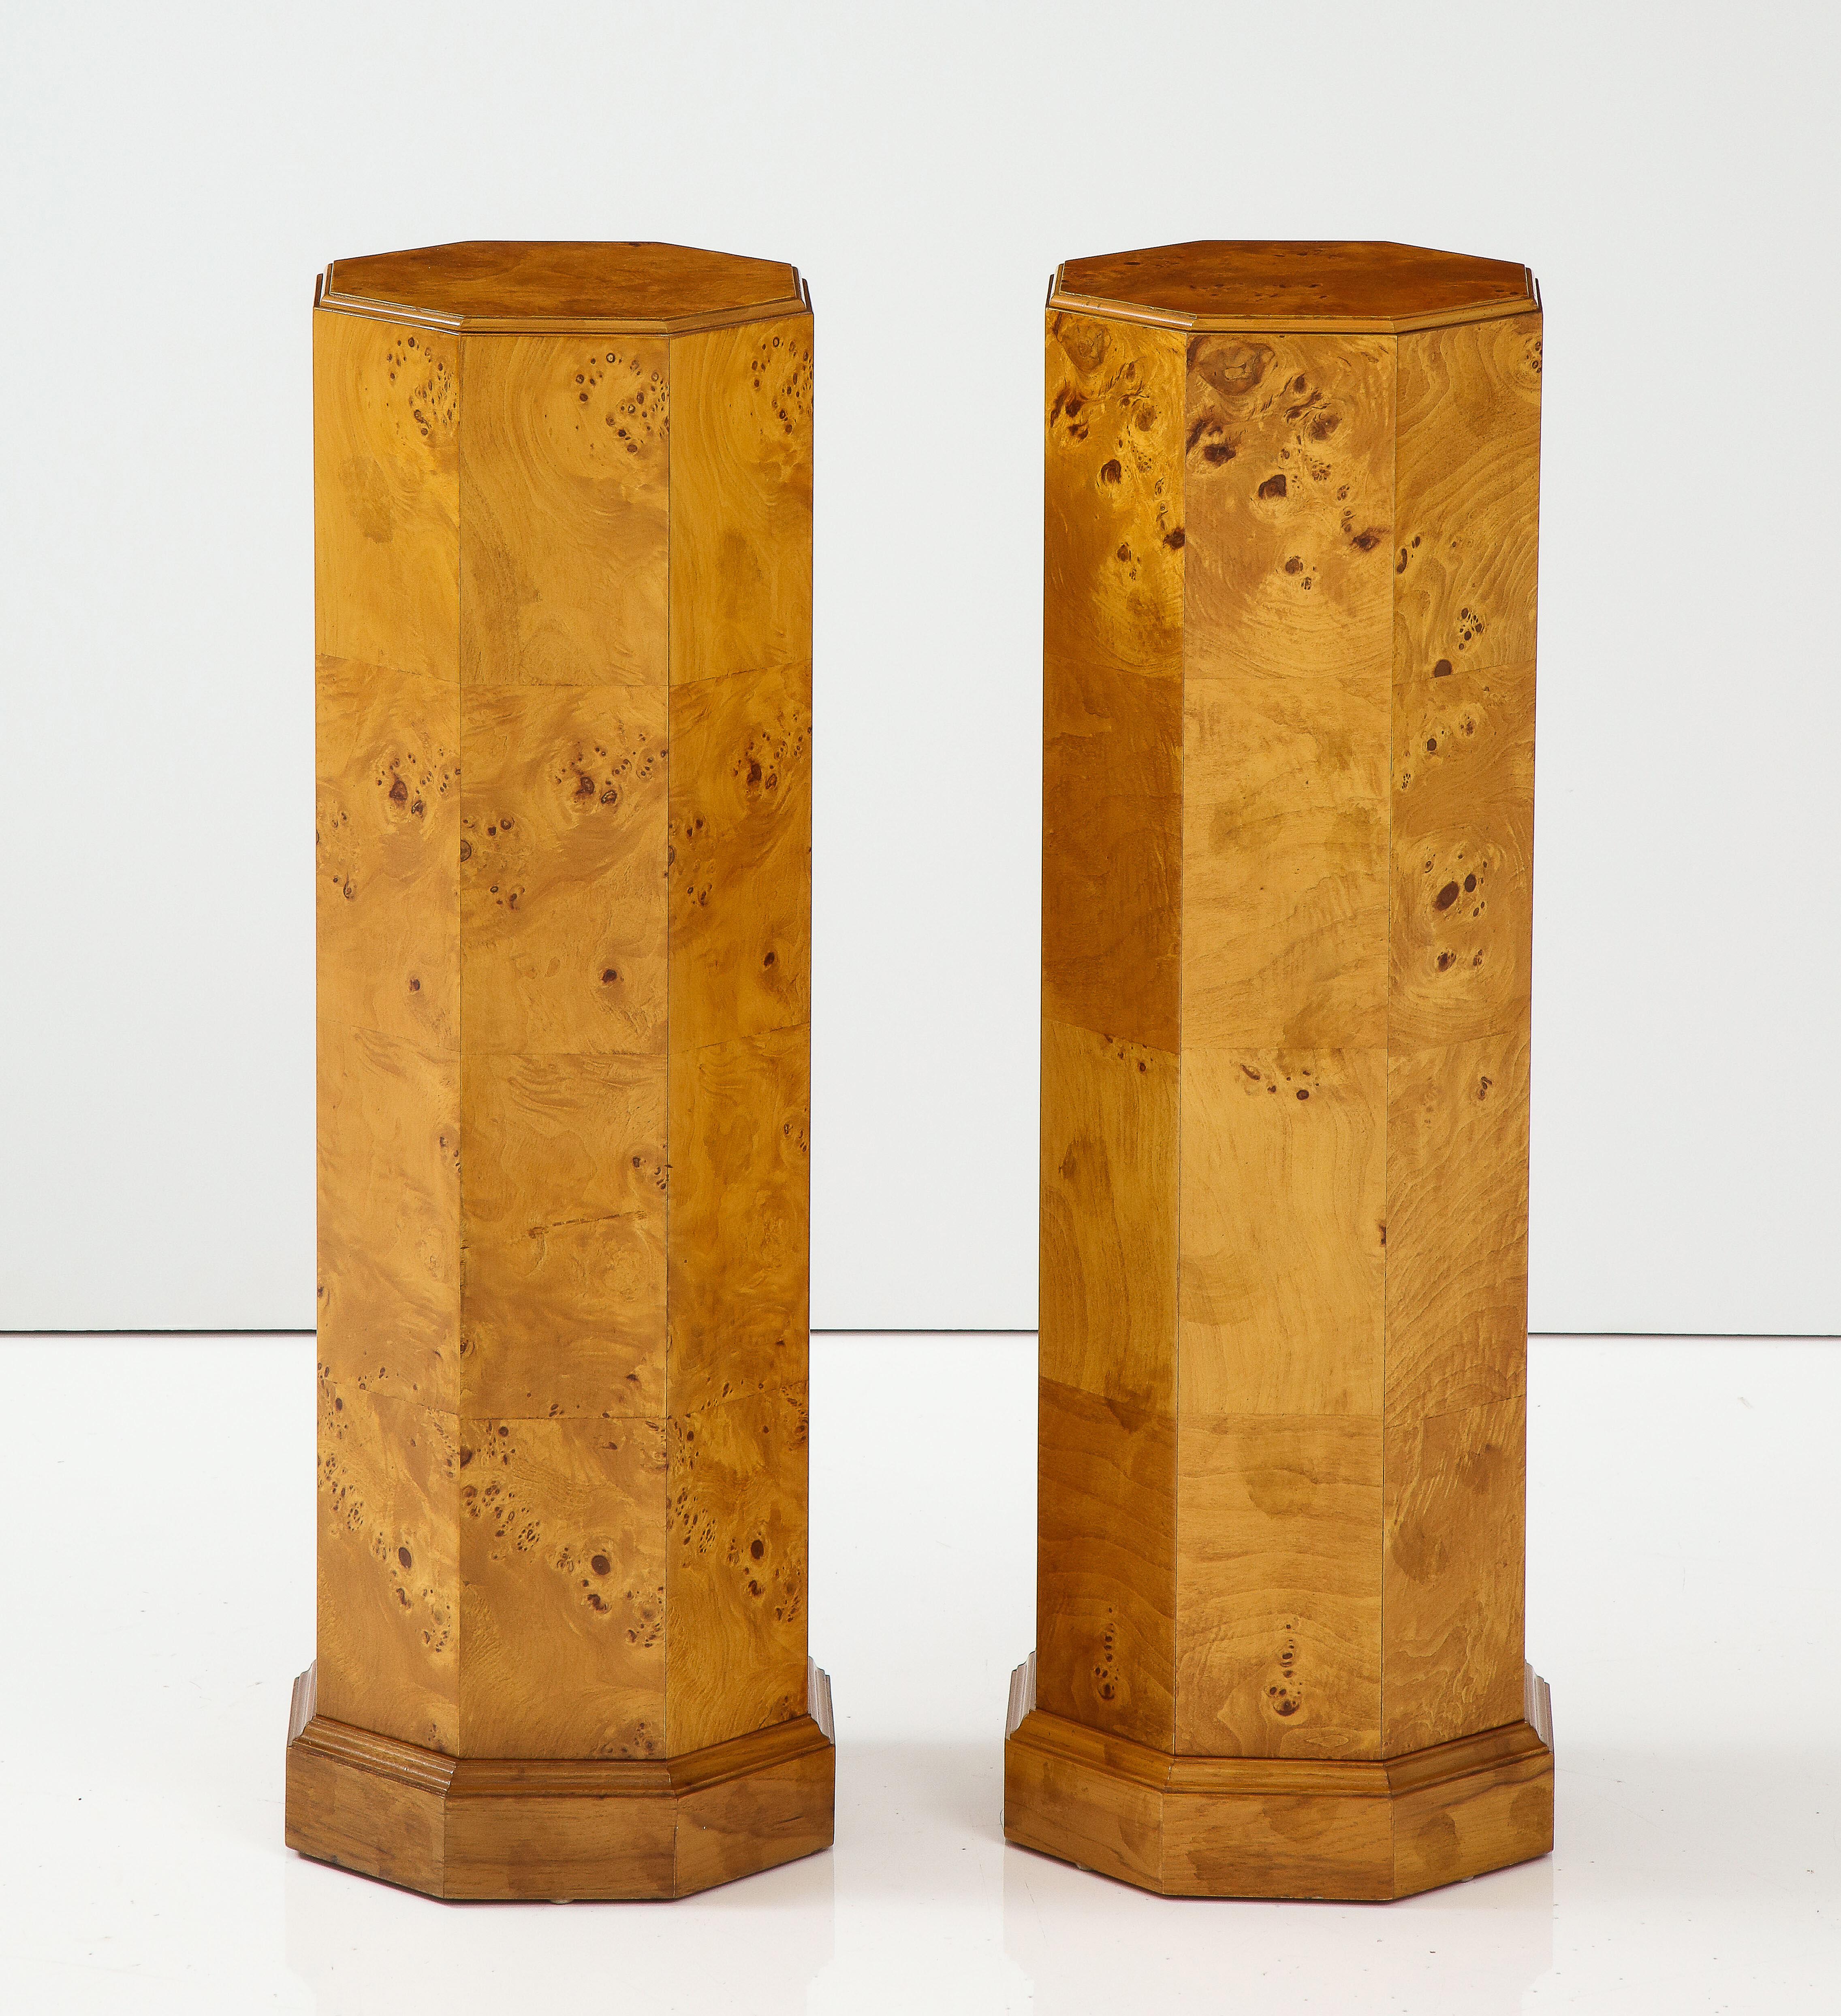 1970's Mid-Century Modern burl-wood pedestals, in vintage original condition with minor wear and patina due to age and use.